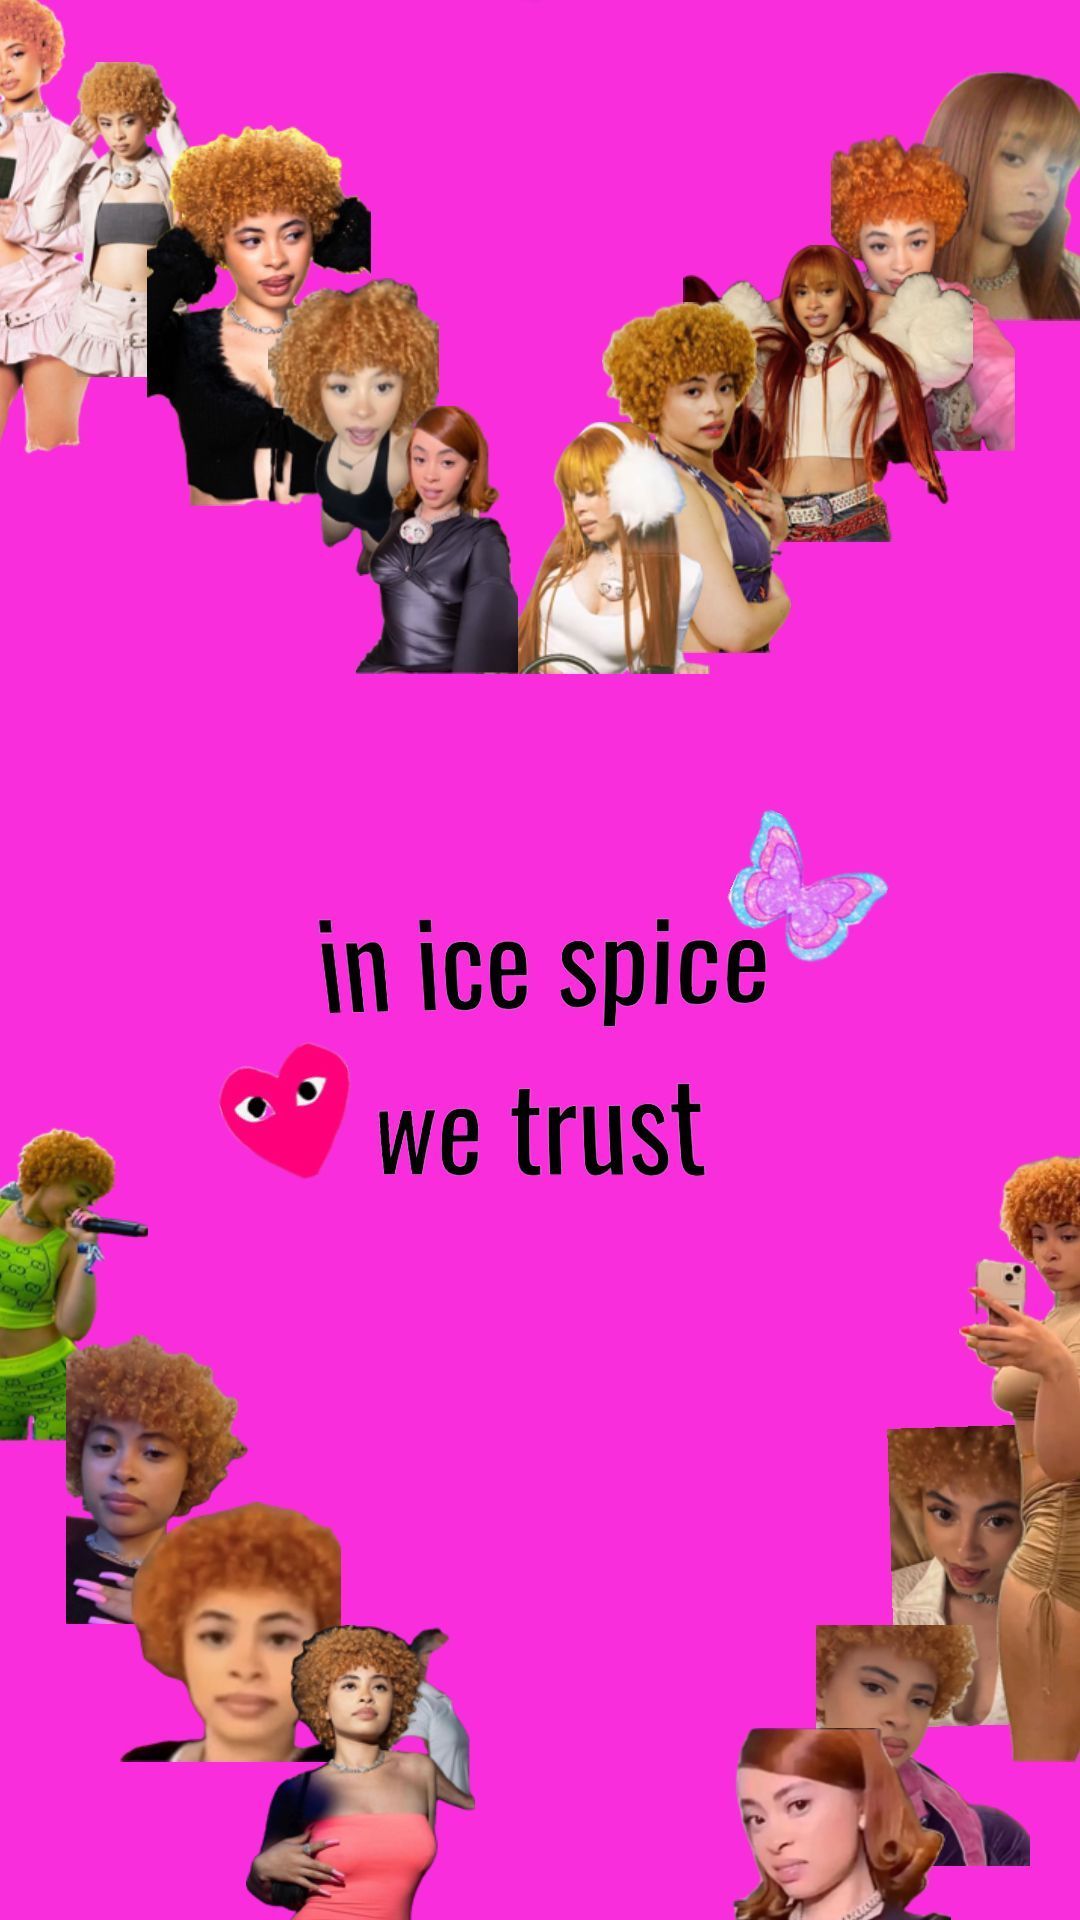 In ice spice we trust - Ice Spice